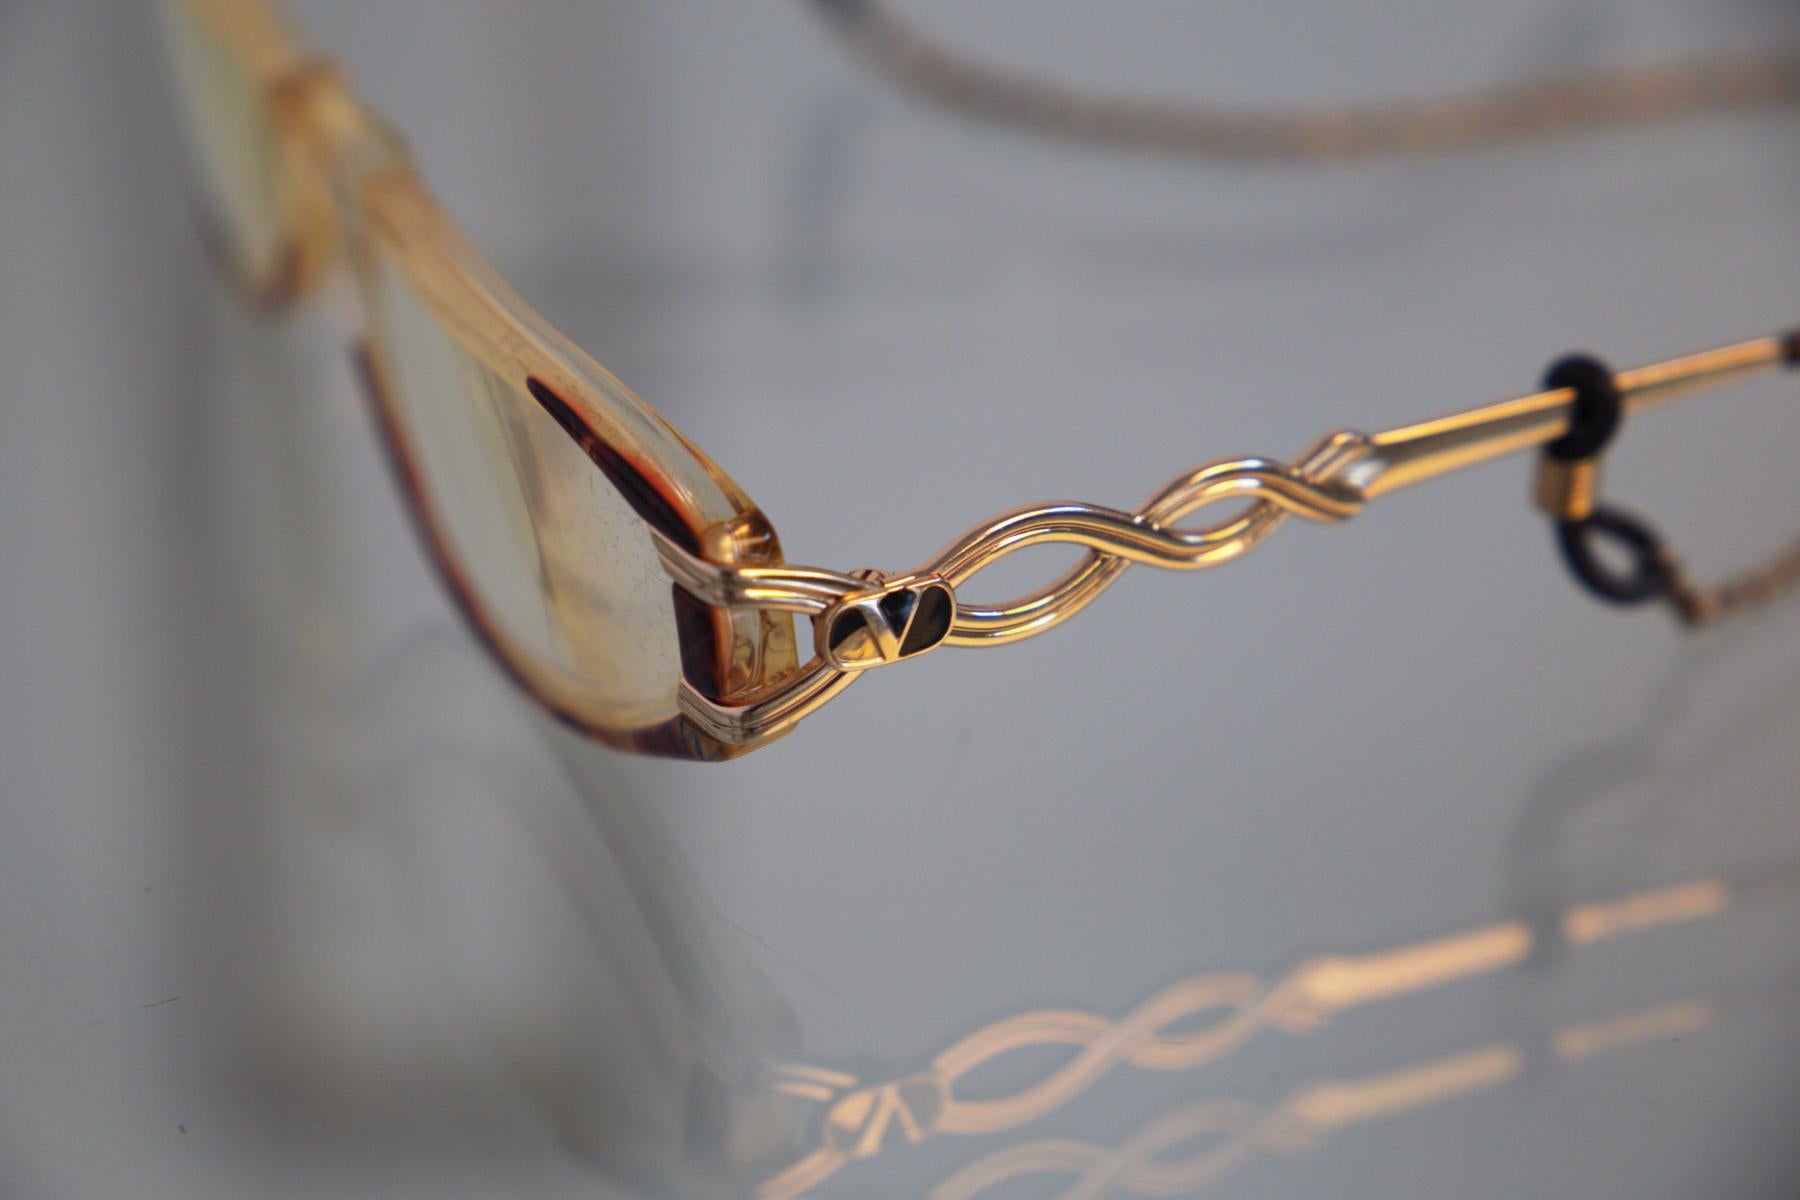 Gorgeous, elegant prescription glasses designed by Valentino in the 1990s, made in Italy. ORIGINAL BRAND.
The frame is very sweet and cat-eye, tortoiseshell style. The wands are shiny gold in a very nice woven pattern with Valentino's signature on